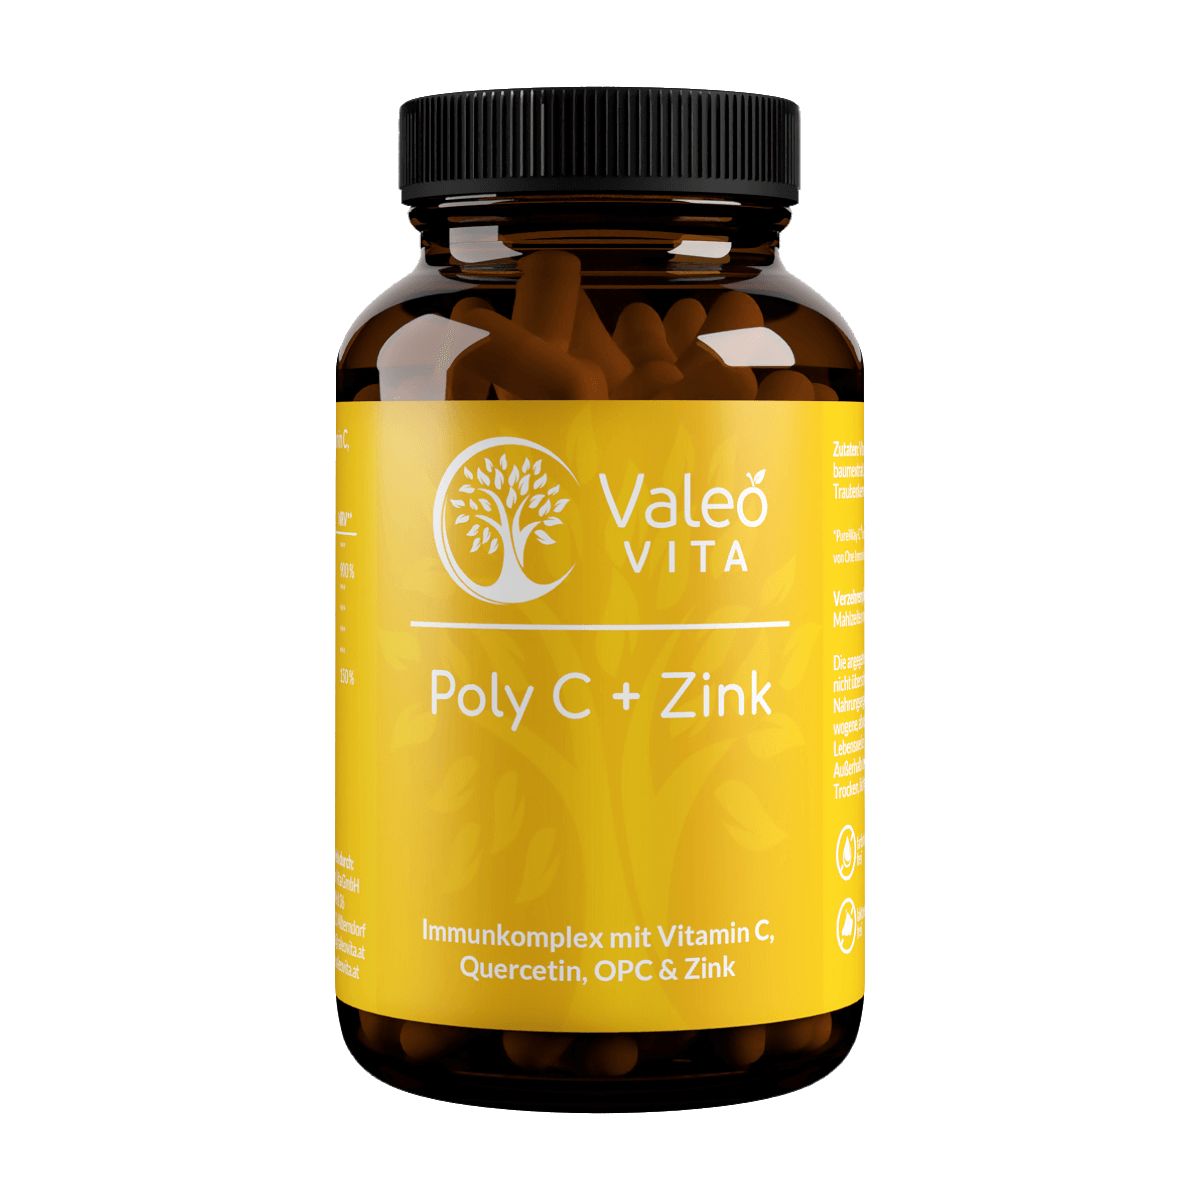 Valeo Vita ™ Poly C + Zink - Immunk complex (with OPC and Quercetin)